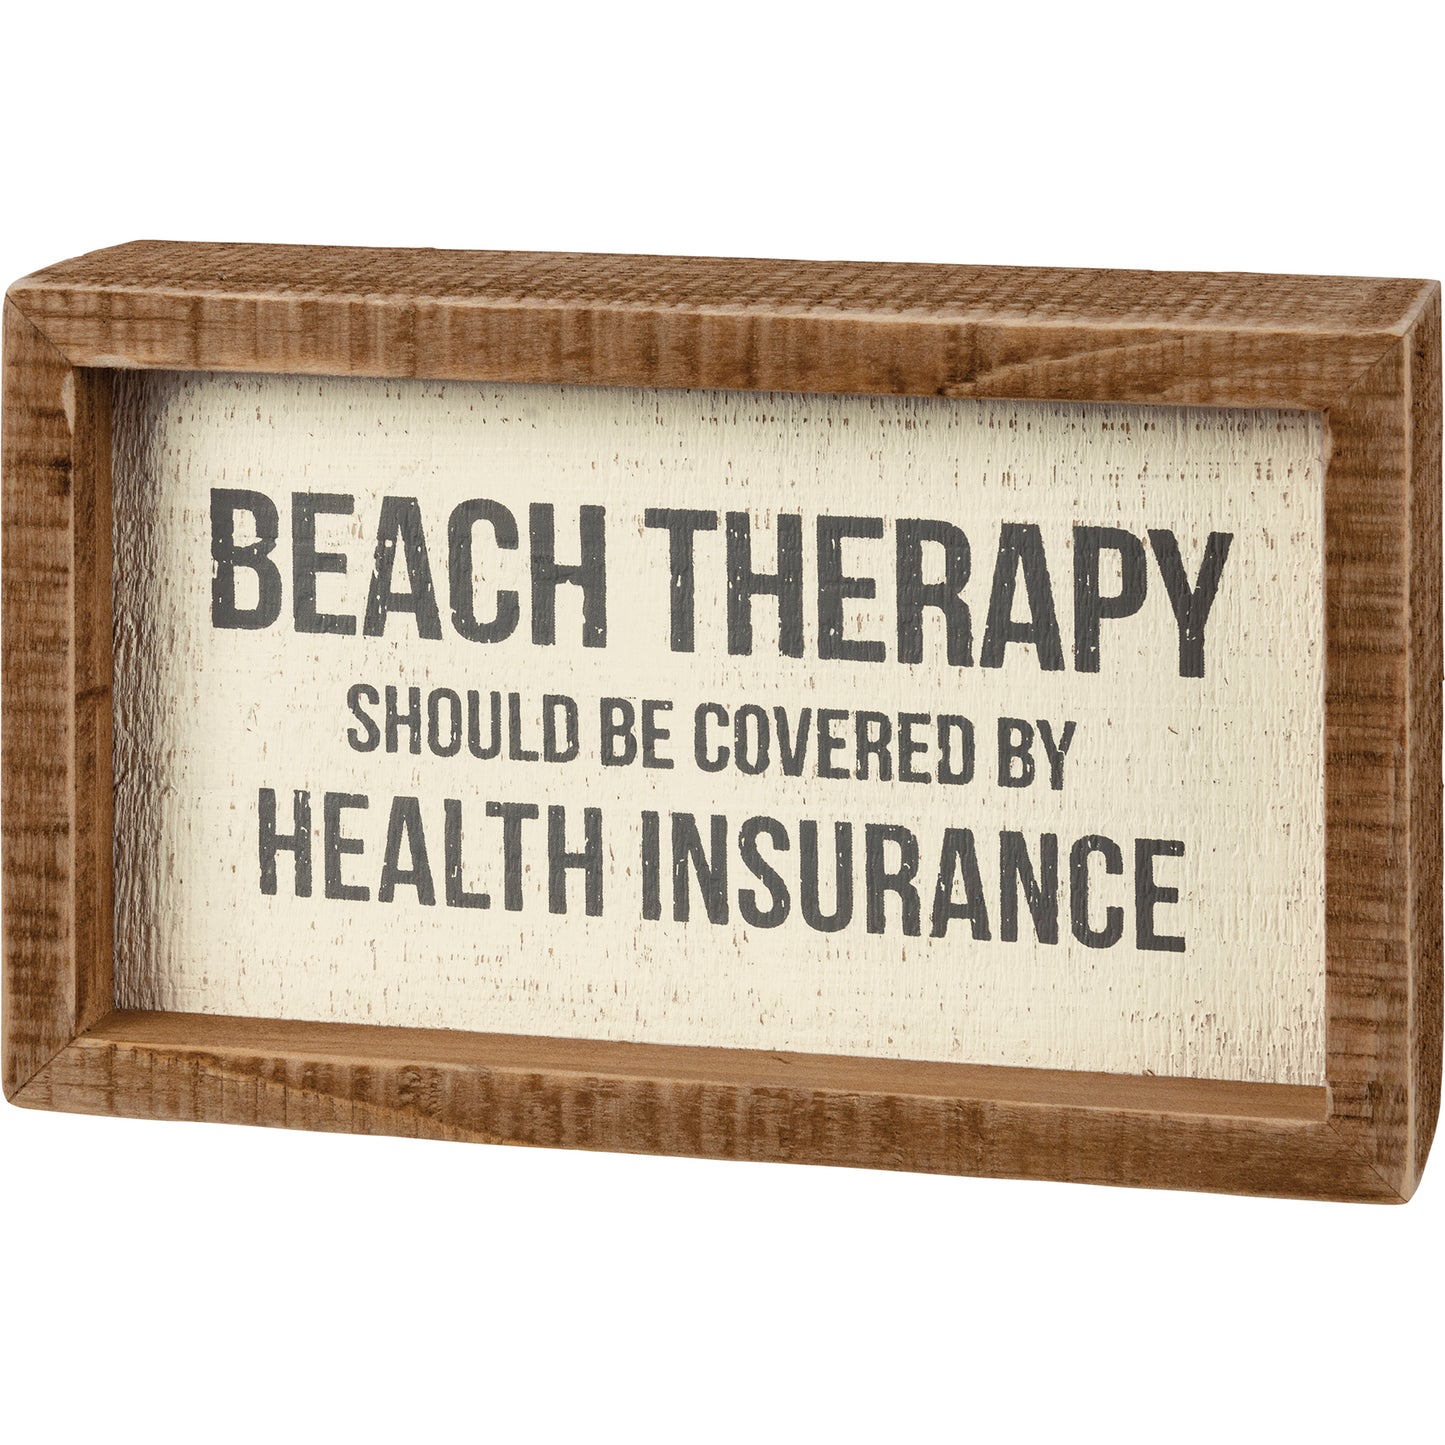 Inset Box Sign - Beach Therapy Should Be Covered